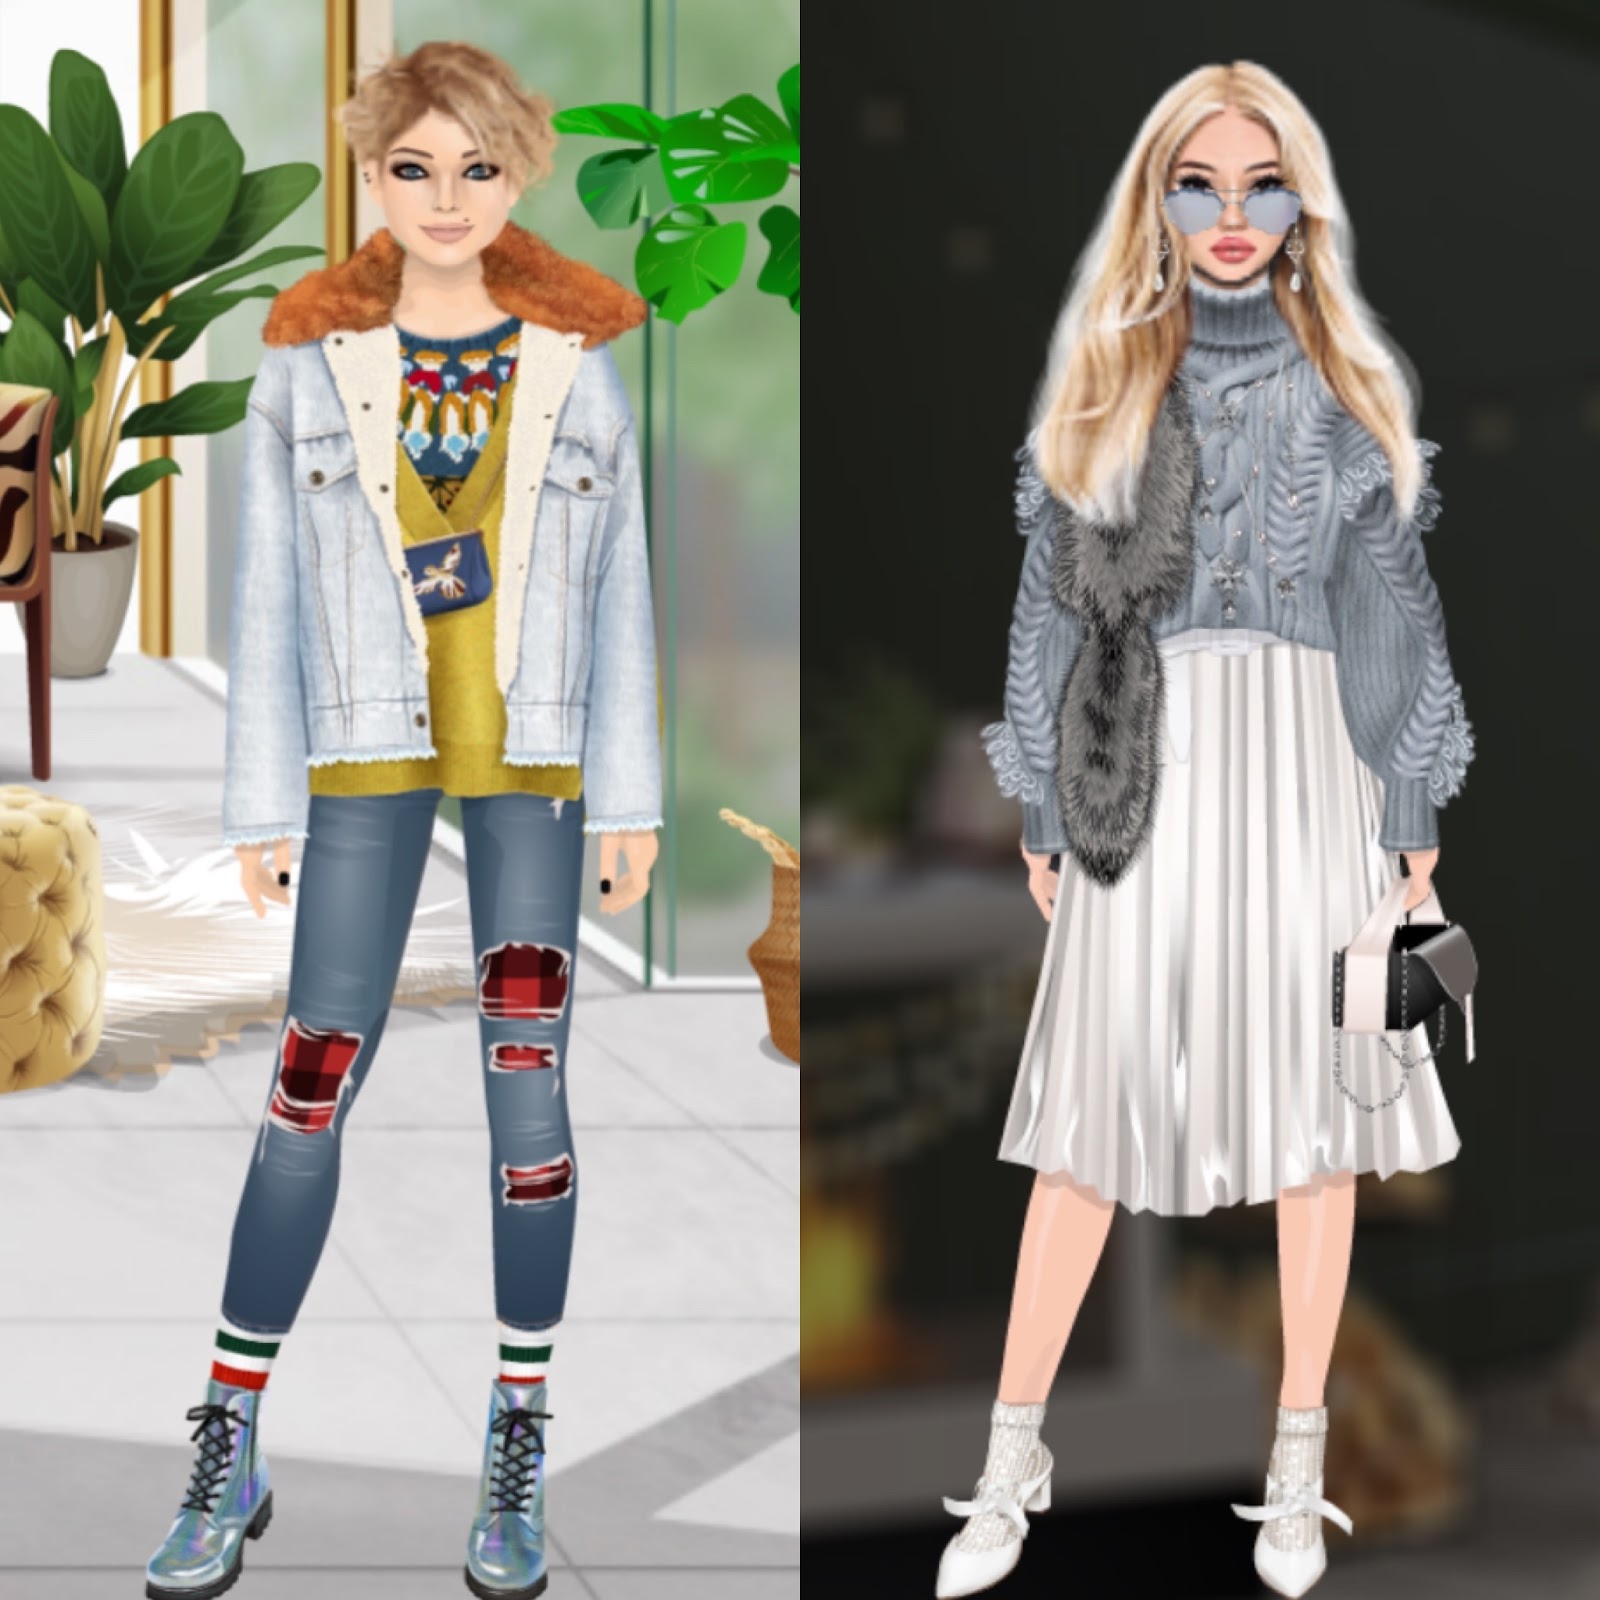 Apres Ski Poll (Closed and Winner Announced) | Stardoll's Most Wanted...